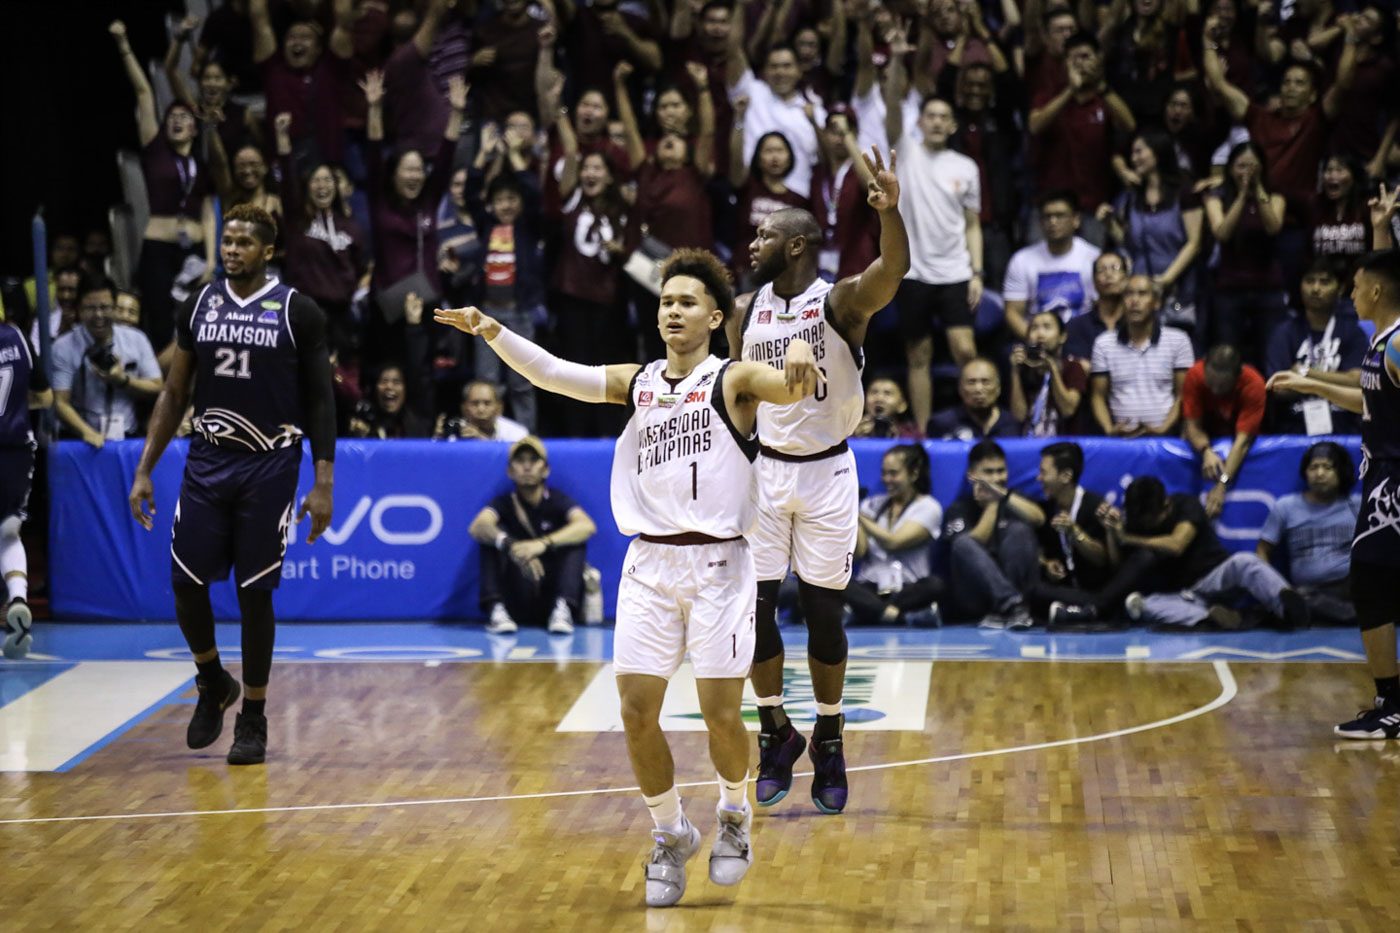 #AtinTwo: U.P. Maroons nail first UAAP Finals berth in 32 years